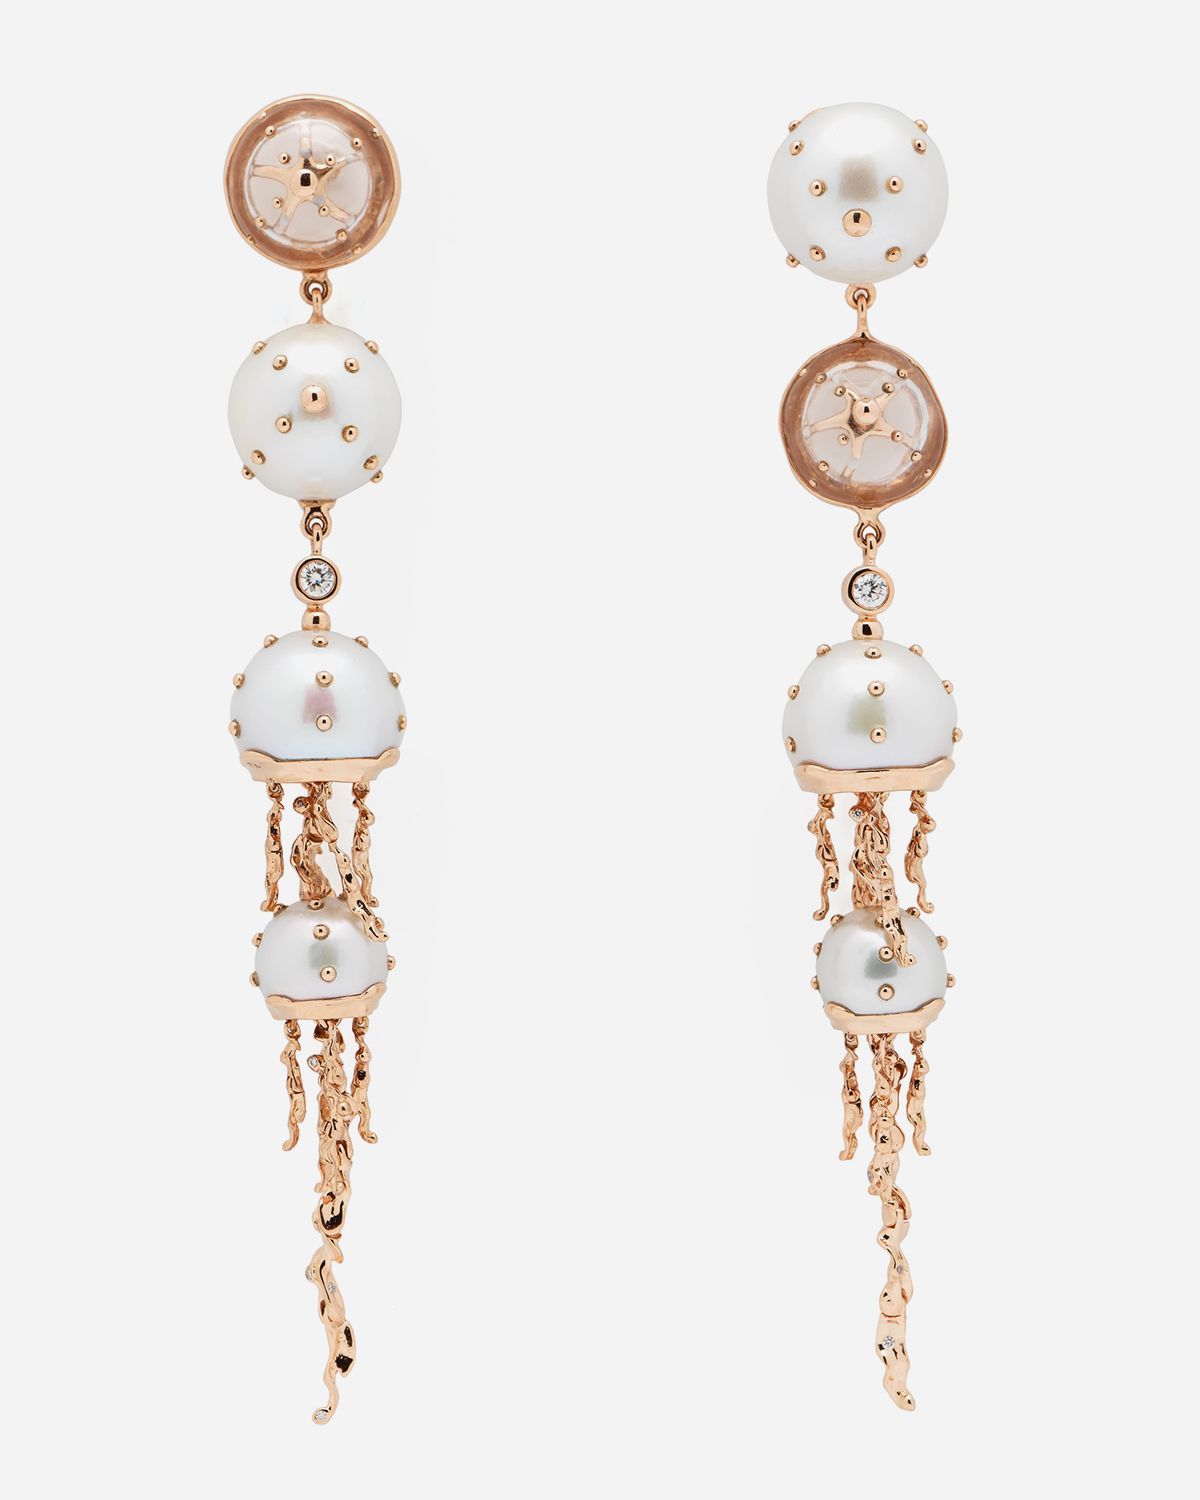 Jellyfish Quartz and White Pearls Drop Earring